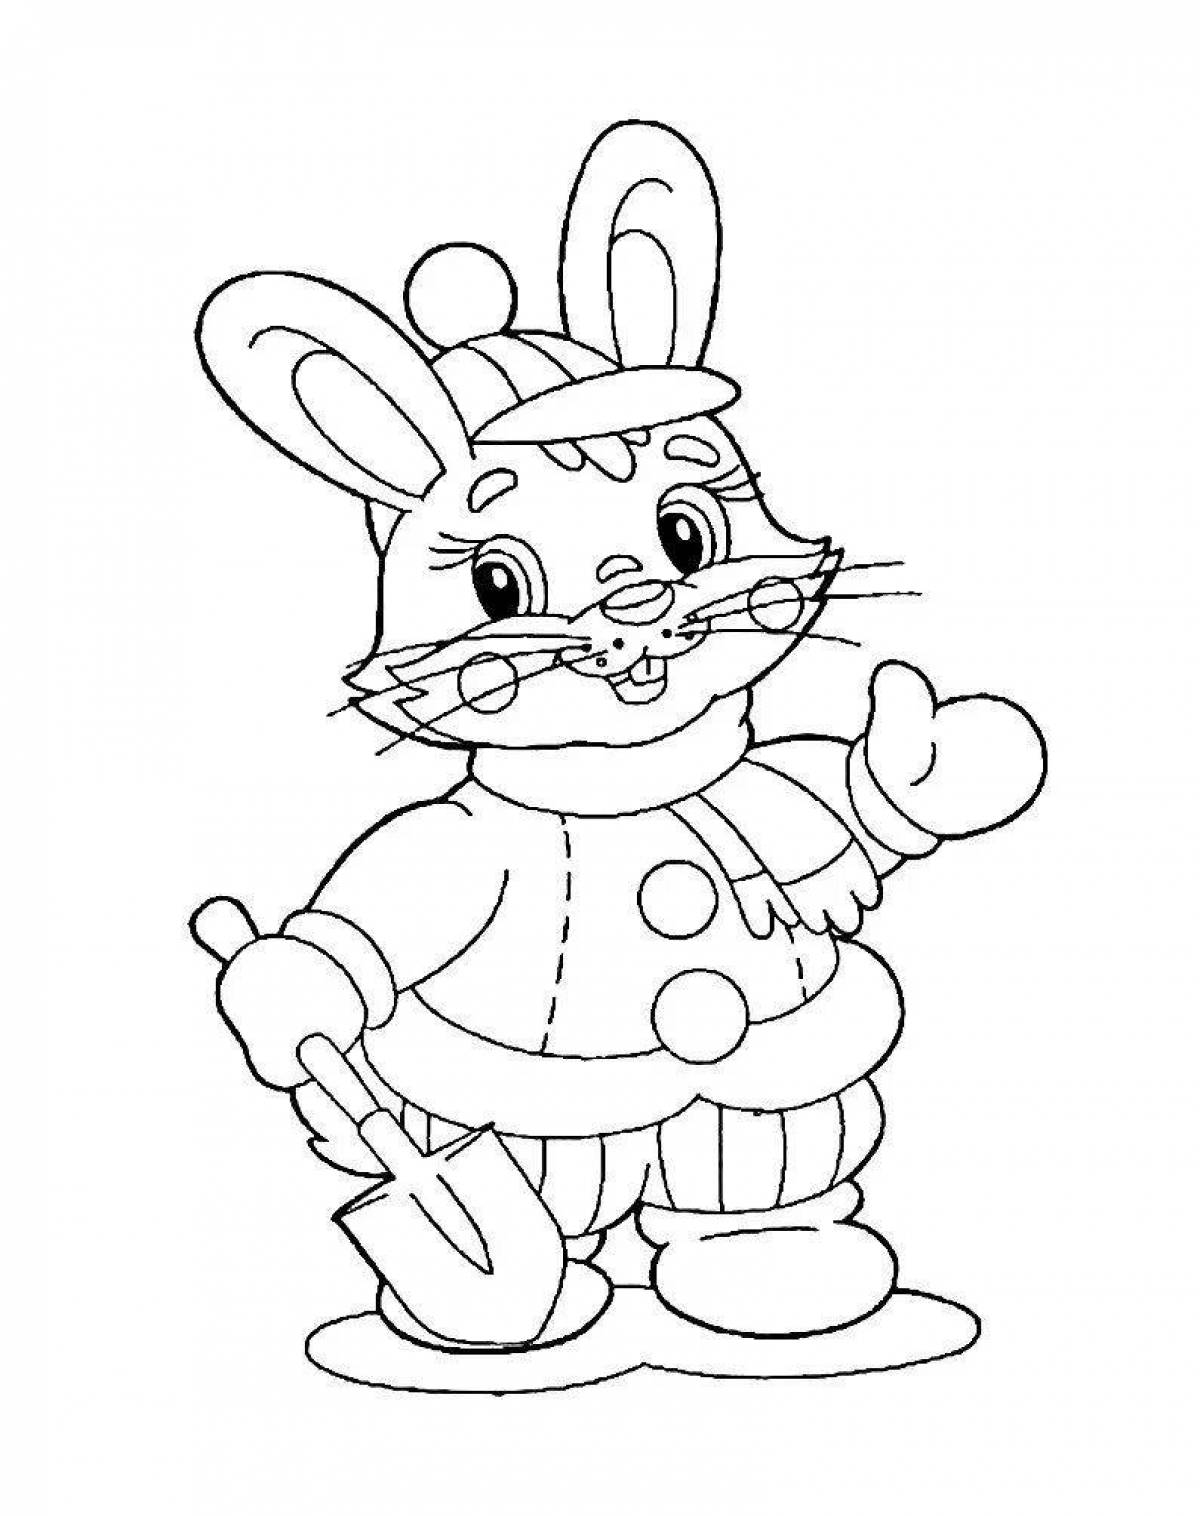 Coloring book nice hare